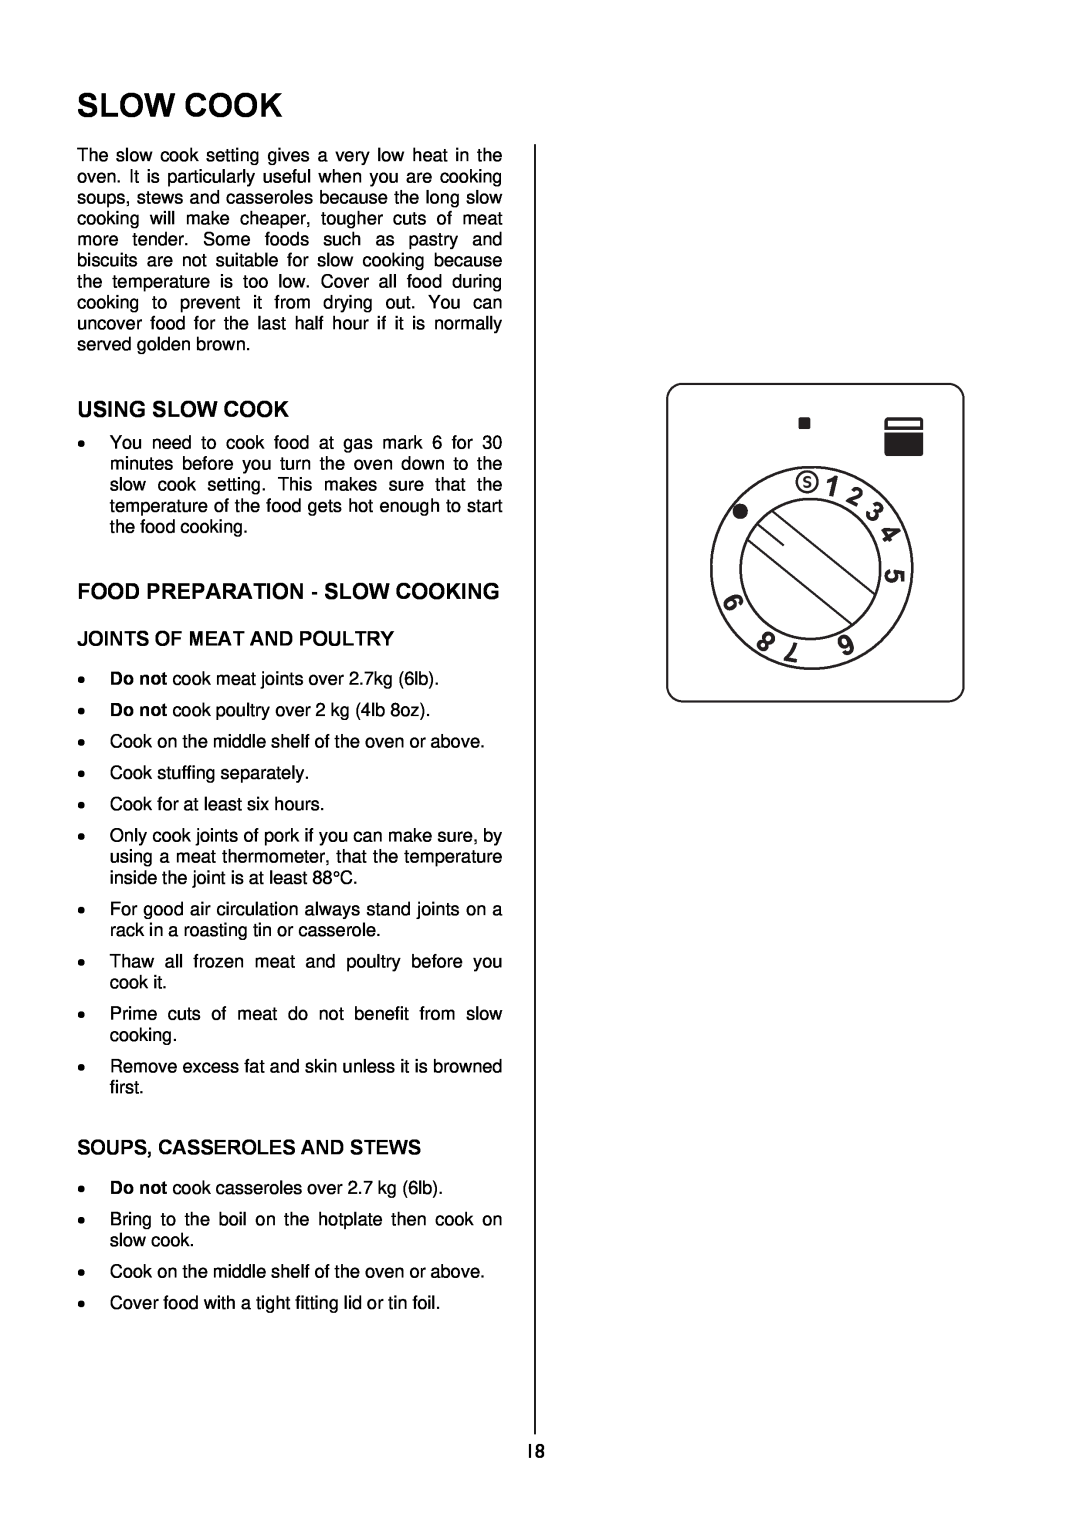 Electrolux EKG5047, EKG5046 manual Using Slow Cook, Food Preparation - Slow Cooking, Joints Of Meat And Poultry 